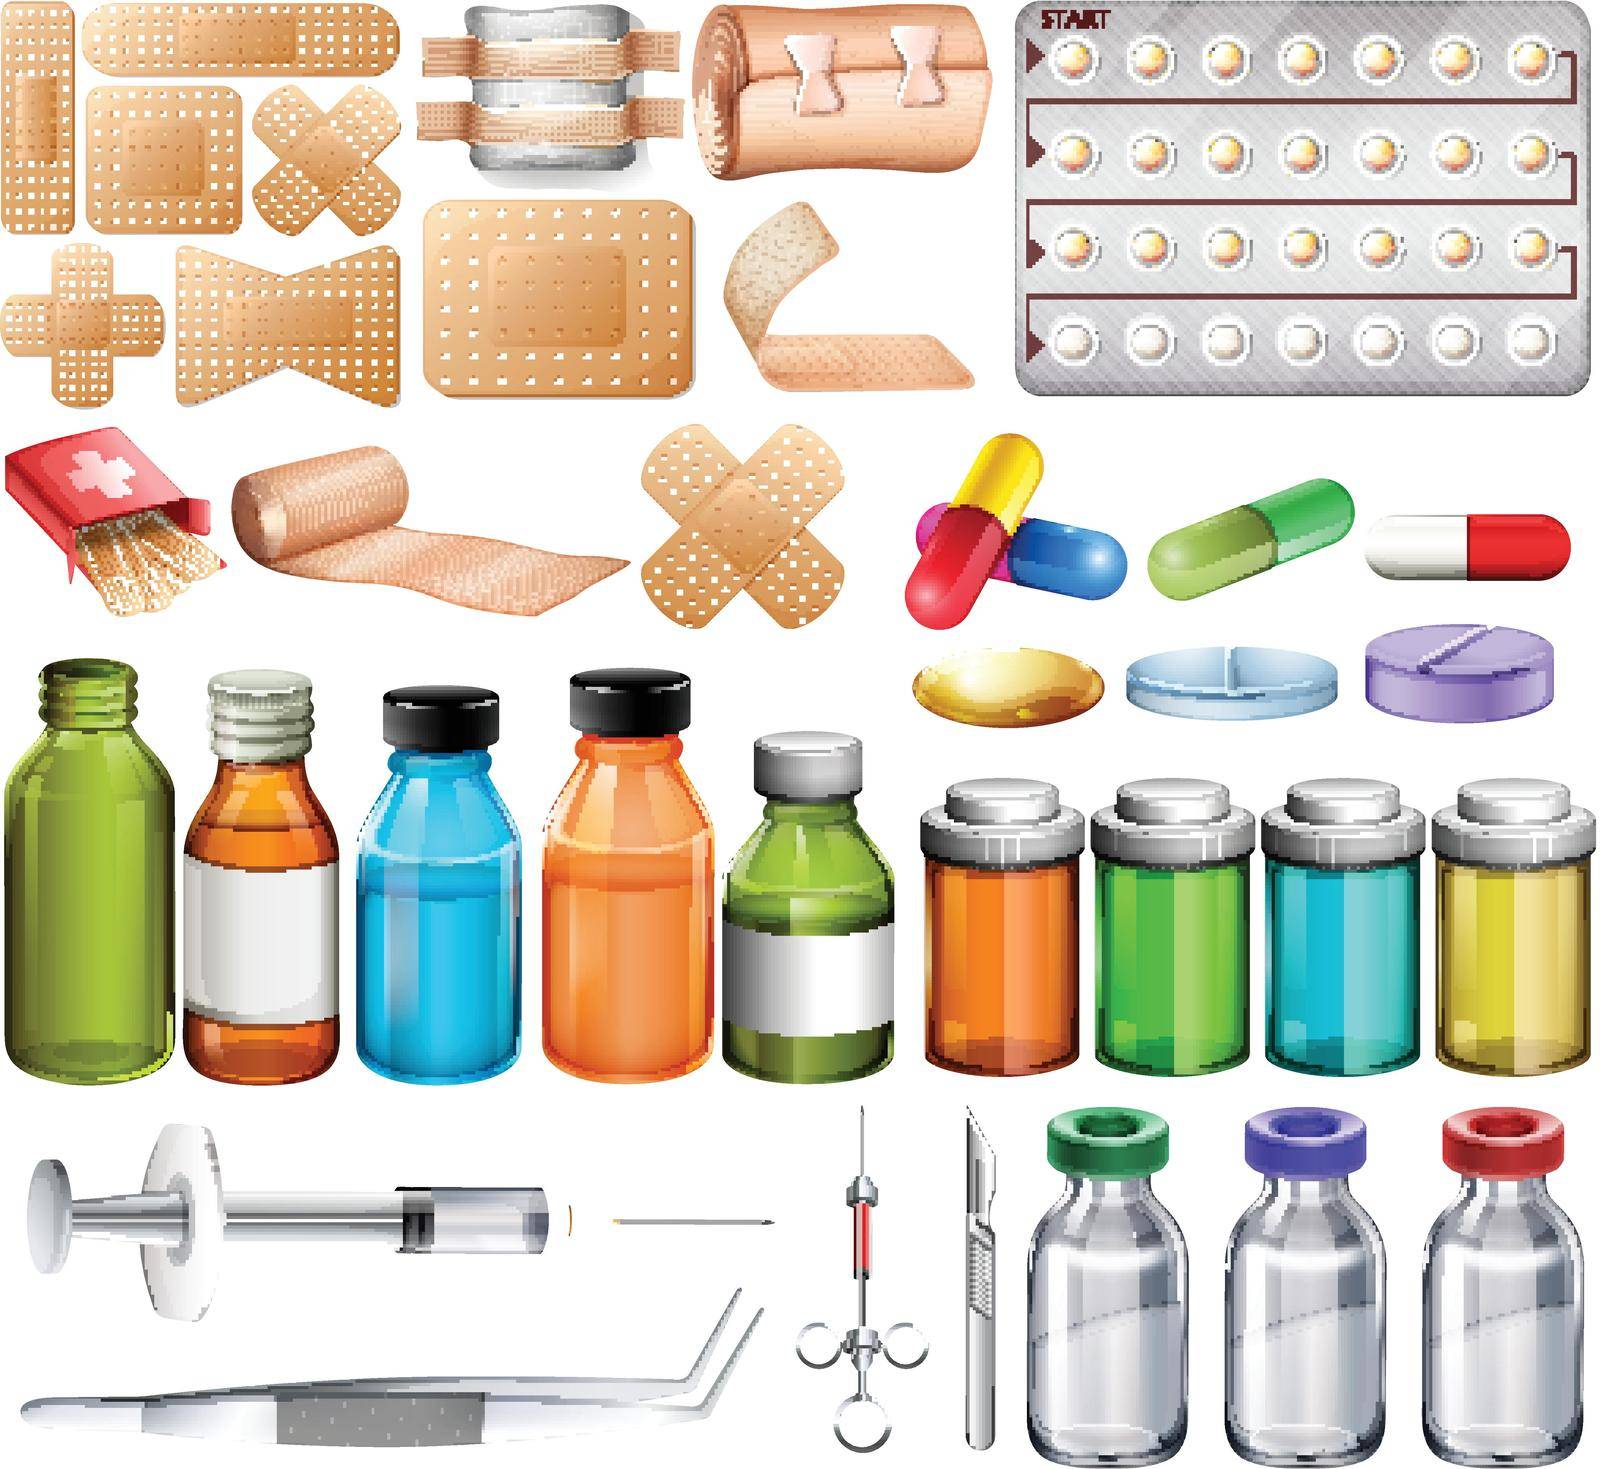 Set of first aid stuff commonly used